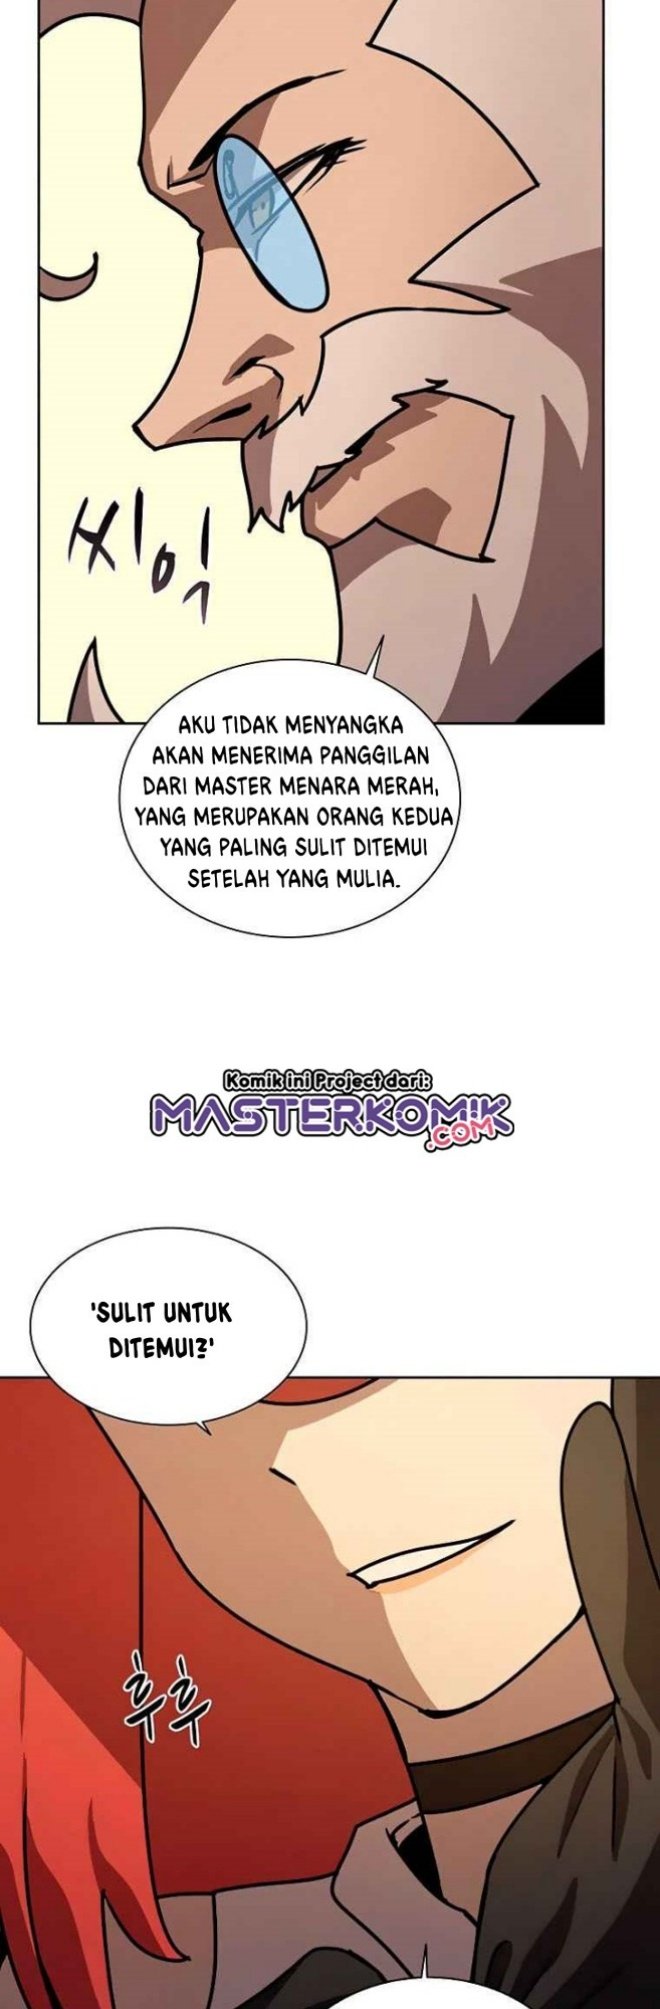 The Book Eating Magician (Book Eater) Chapter 43